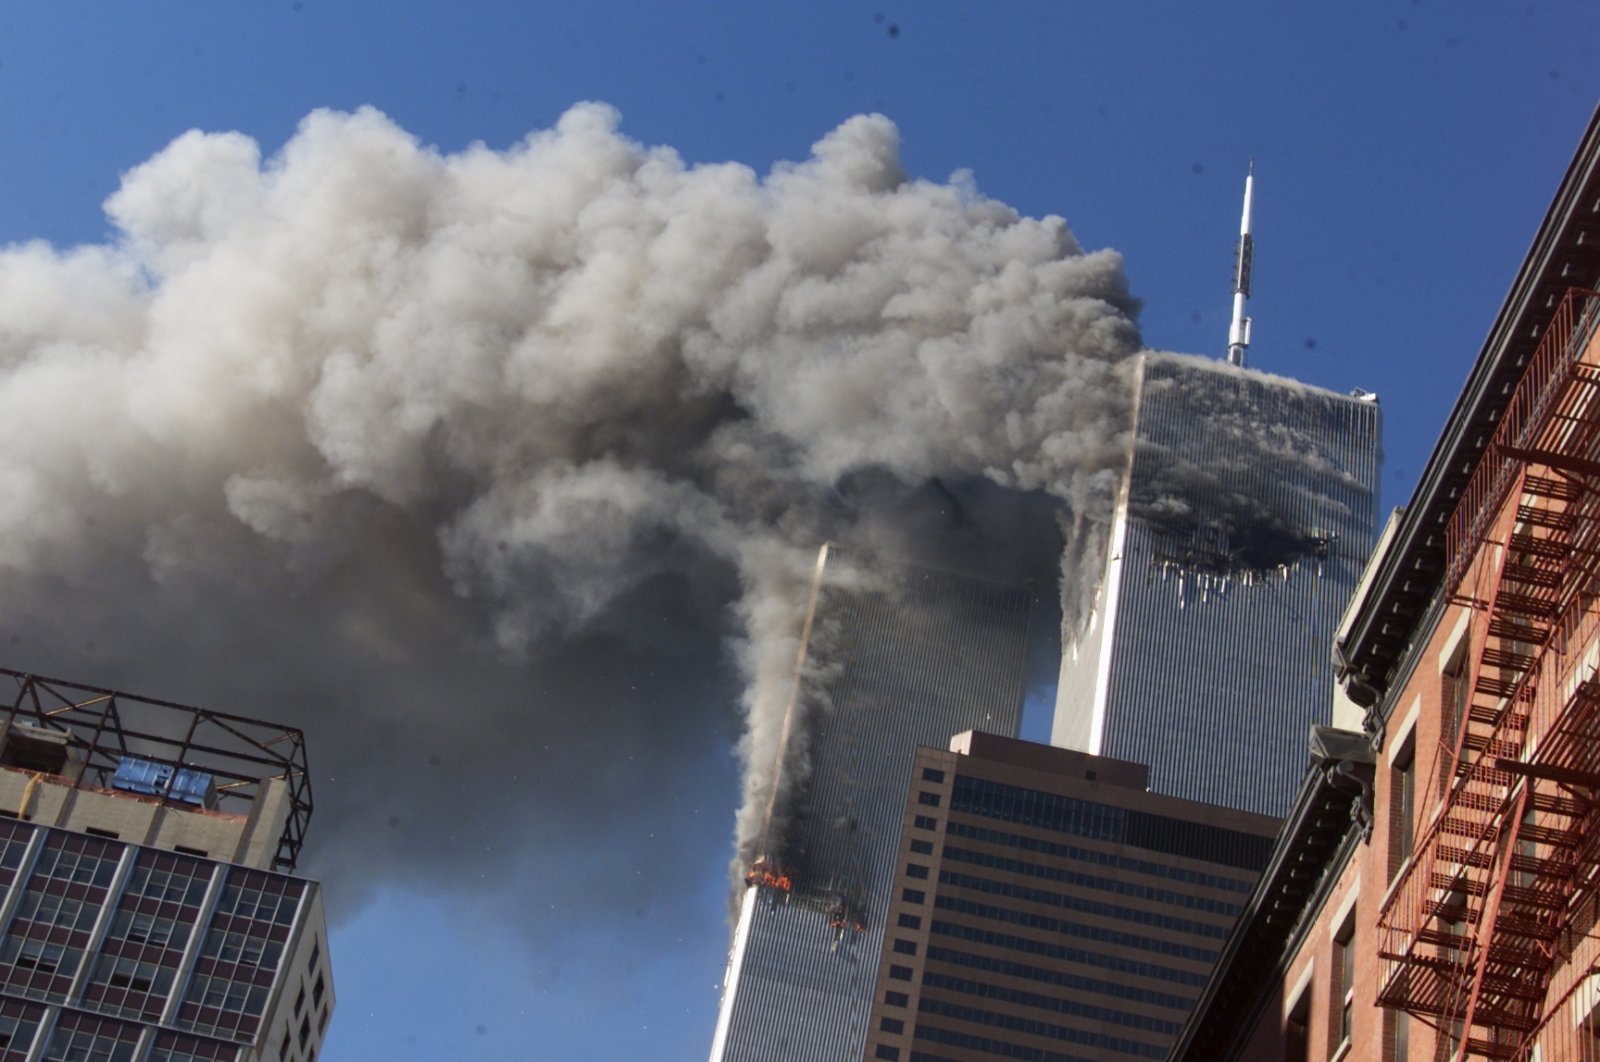 Smoke rises from the burning twin towers of the World Trade Center after hijacked planes crashed into the towers, in New York City, Sept. 11, 2001. (AP Photo)